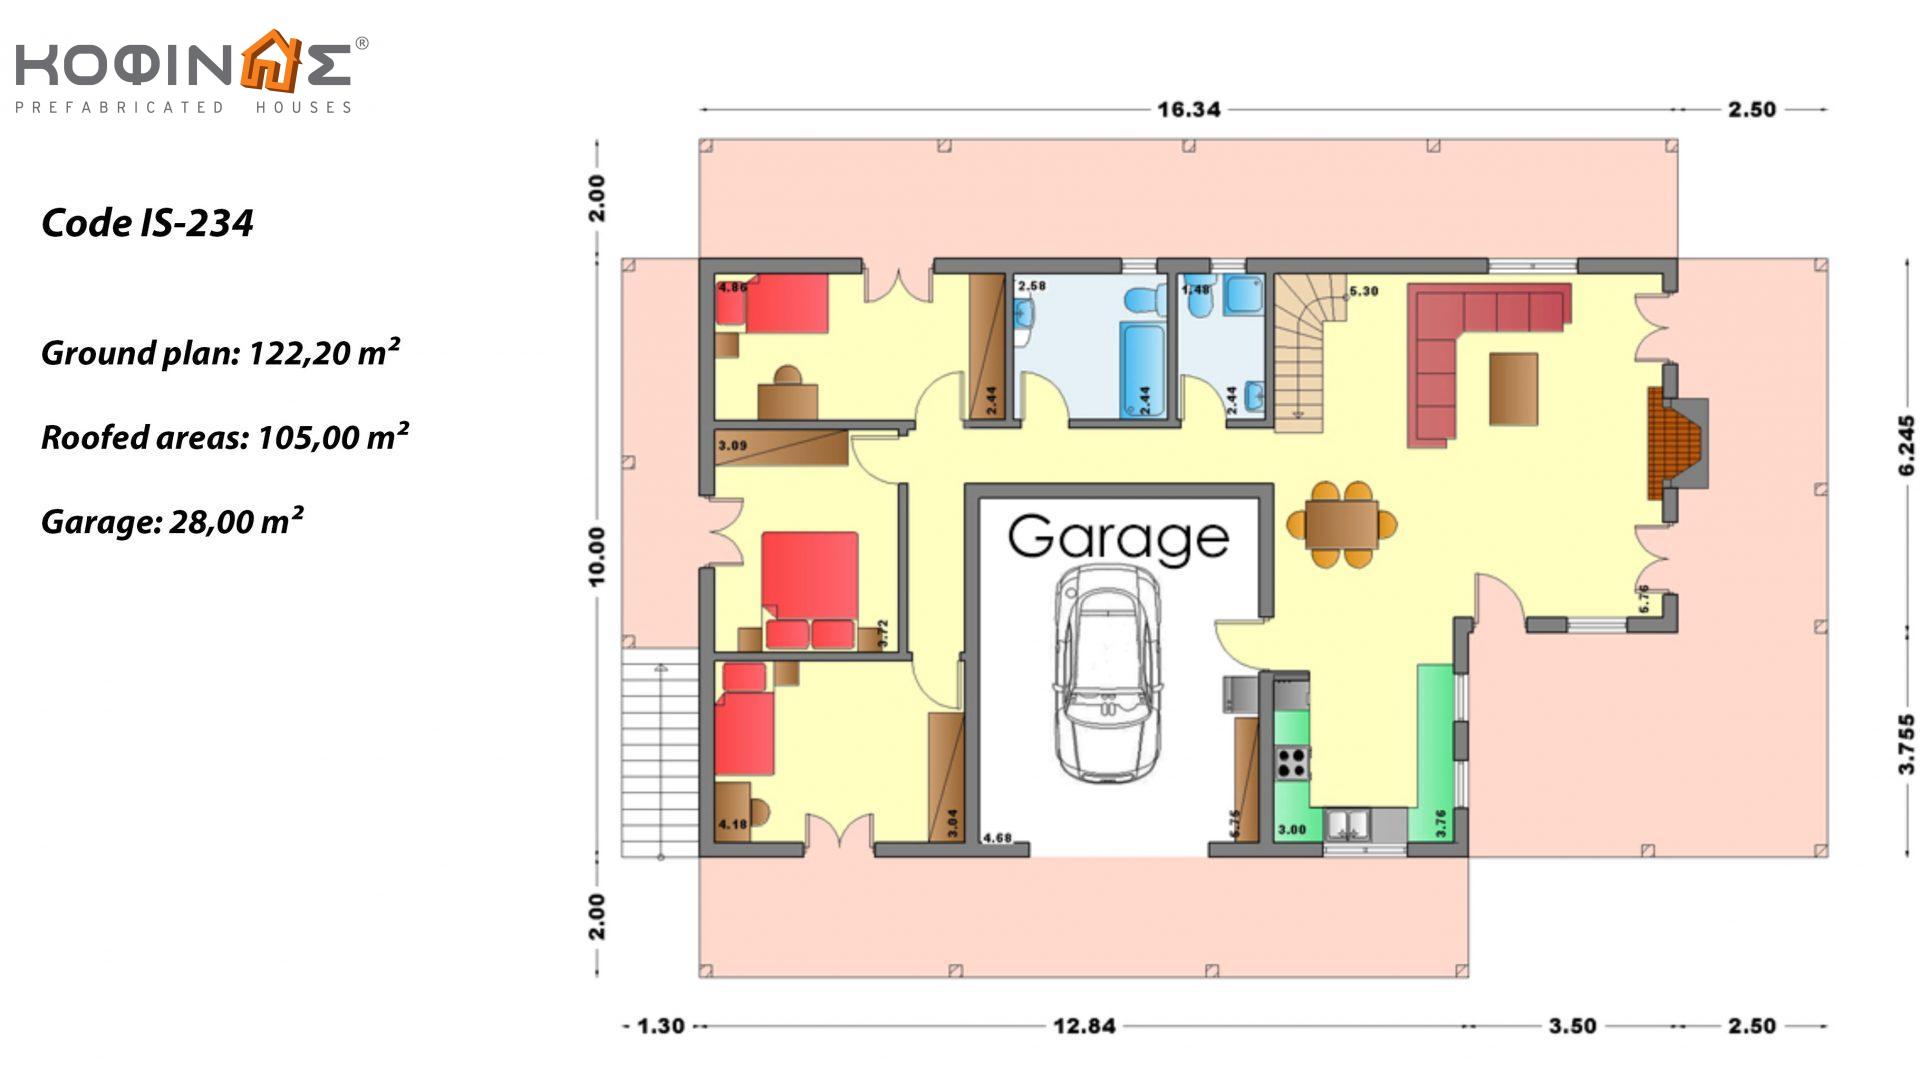 1-story house with attic IS-234, total surface of 234,80 m², +Garage 28.00 m²(=262,80 m²), covered roofed areas 105,00 m²